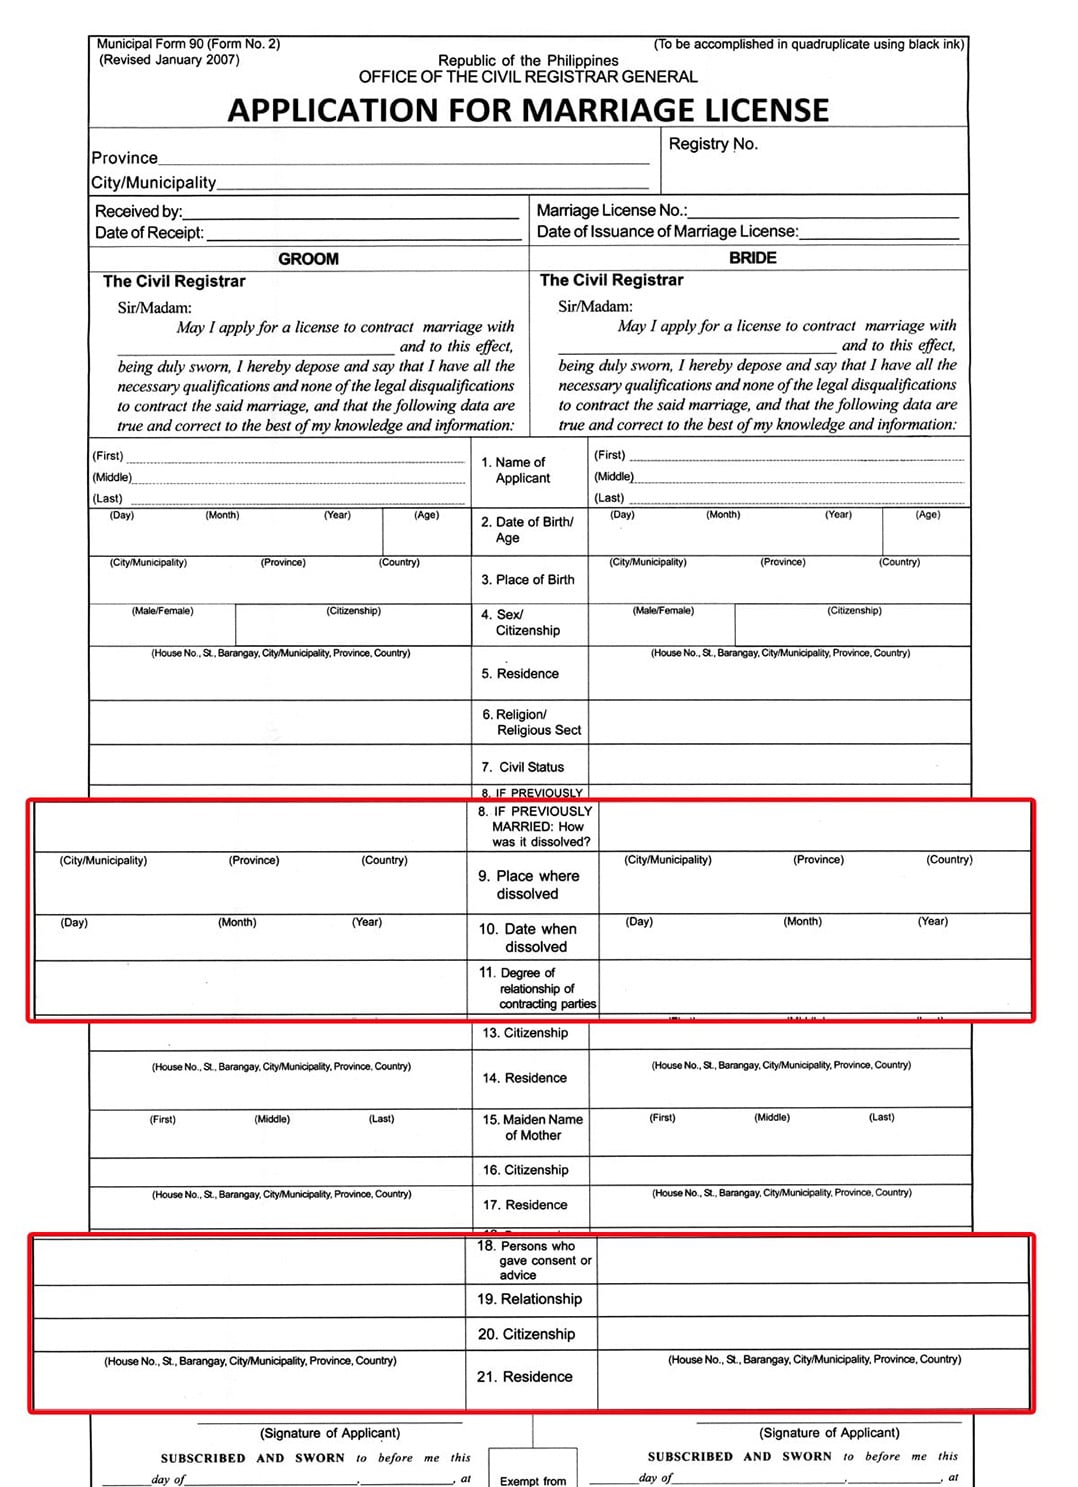 Marriage License application form